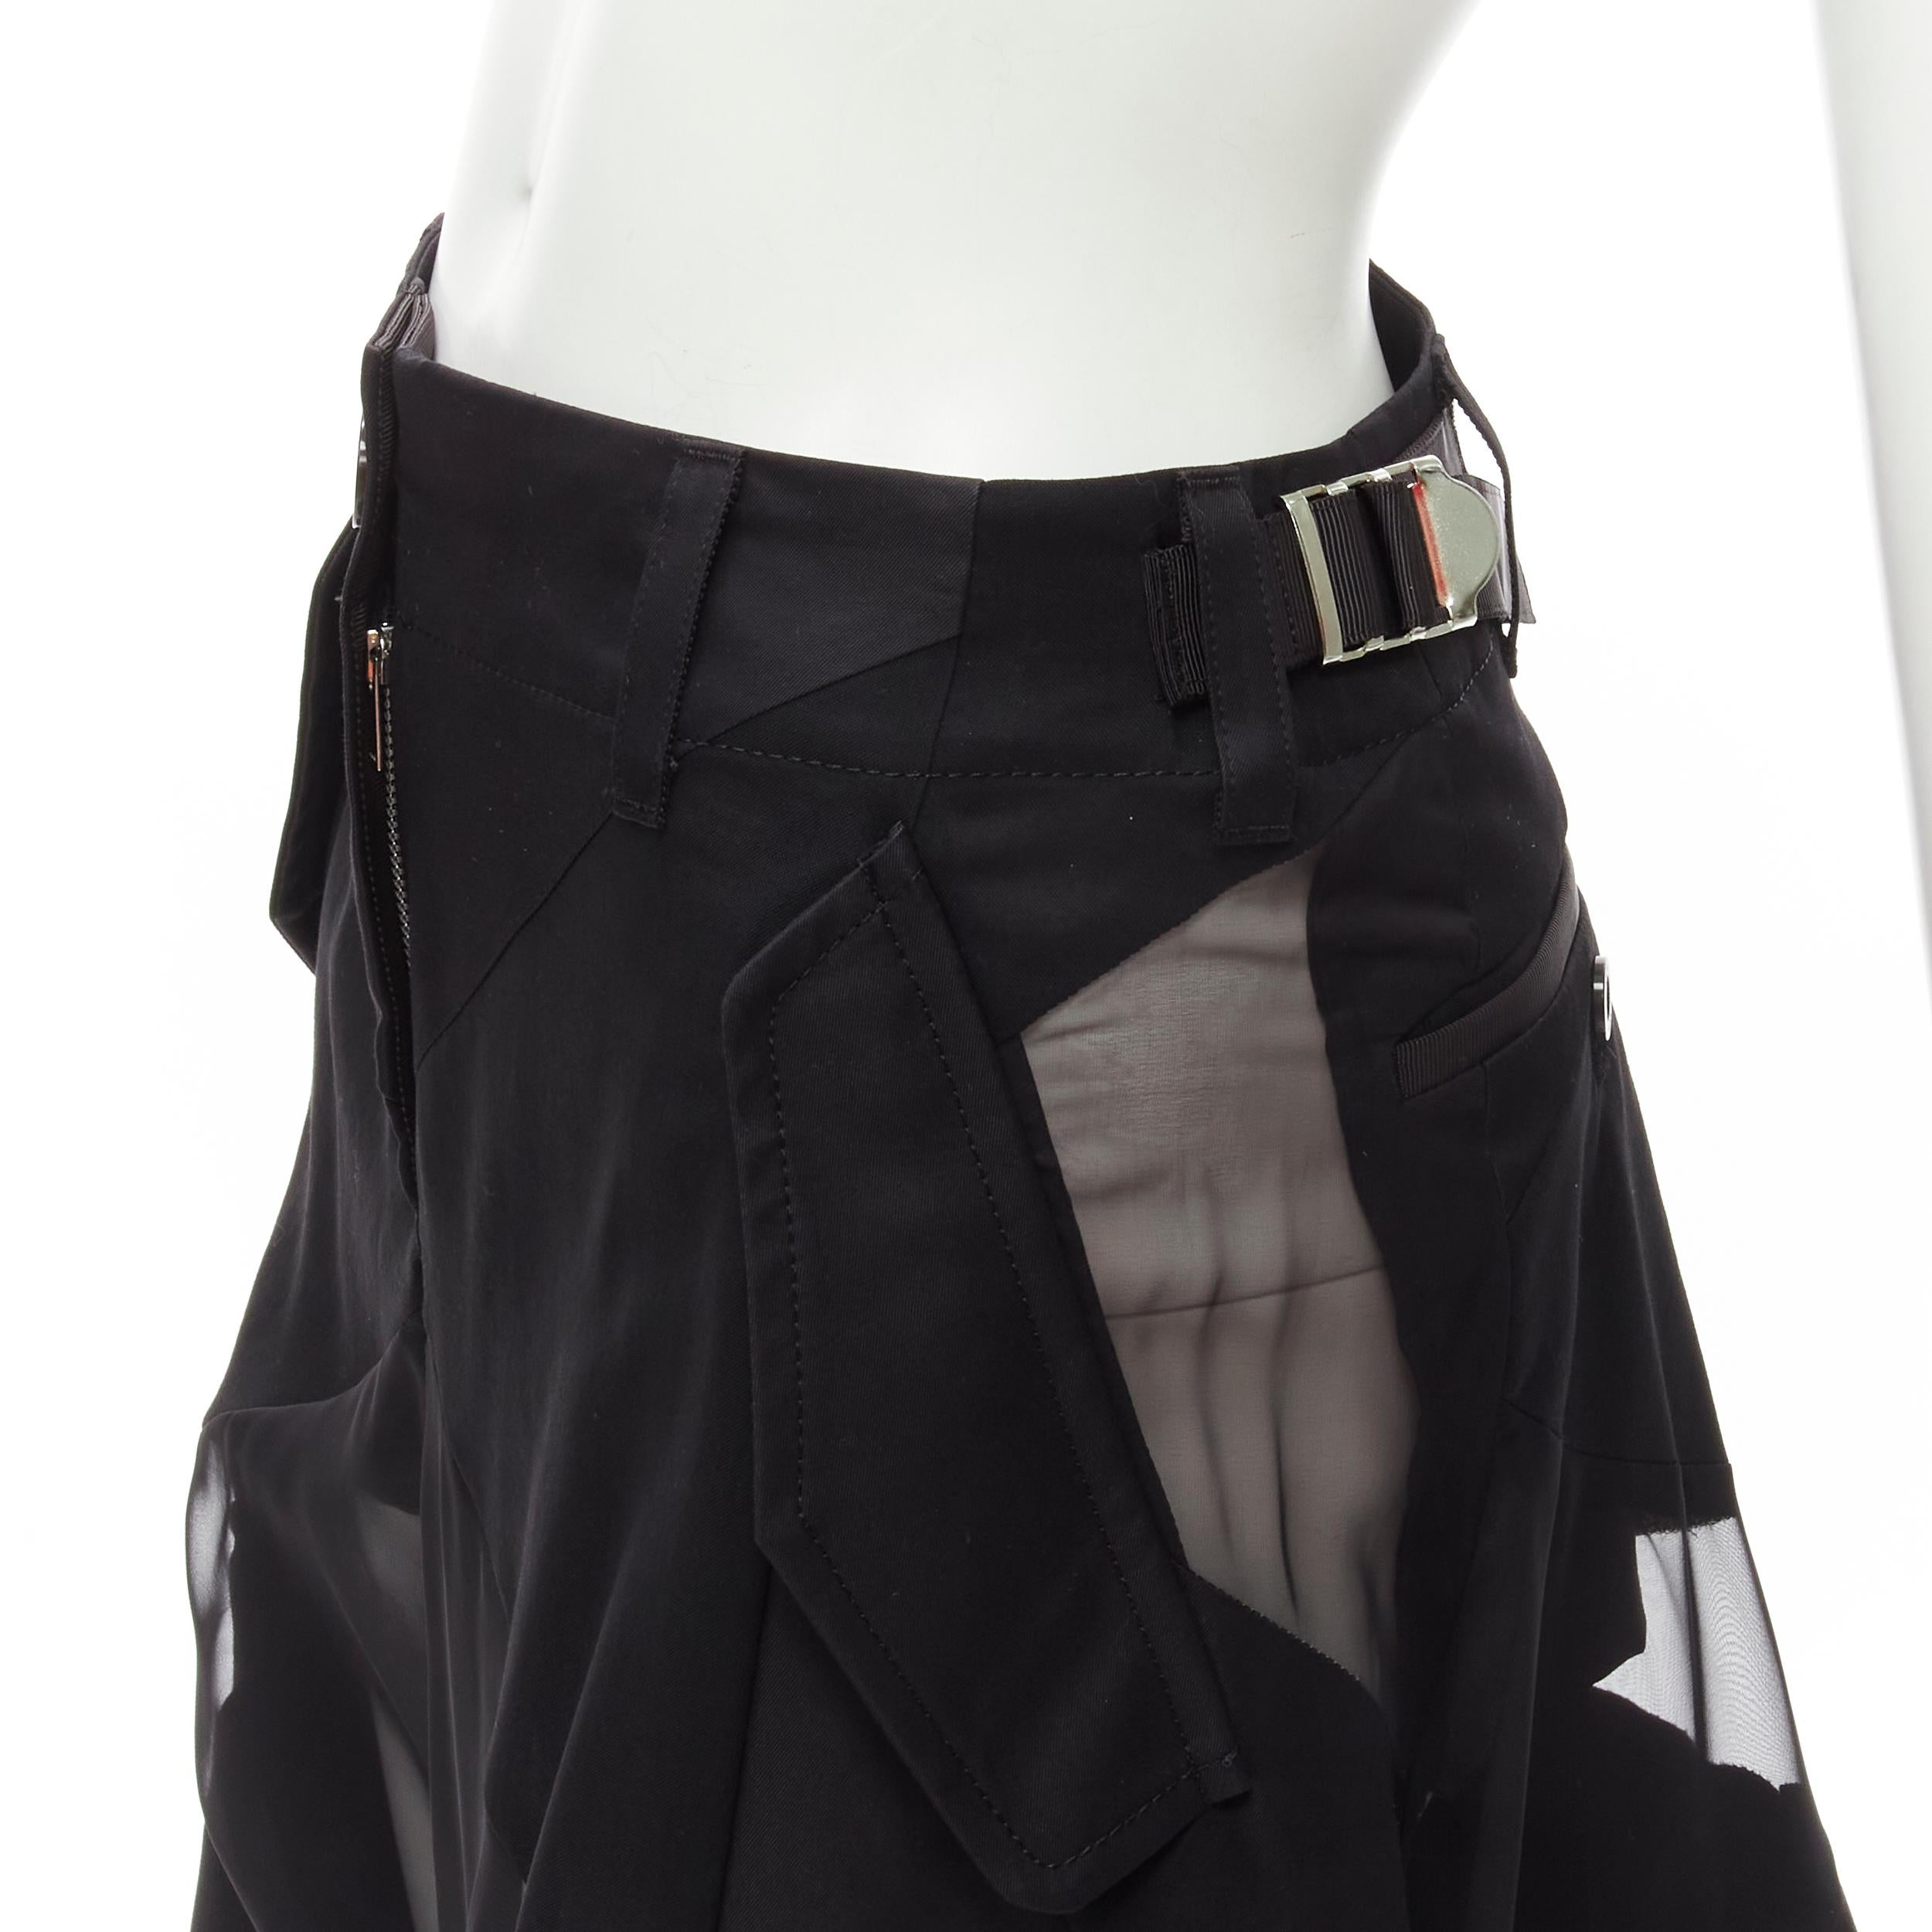 SACAI Chitose Abe black deconstructed sheer panel wide skirt flared shorts S
Brand: Sacai
Designer: Chitose Abe
Material: Feels like cotton
Color: Black
Pattern: Solid
Closure: Zip
Extra Detail: Mixed fabric patchwork design. Sheer panel. Utility